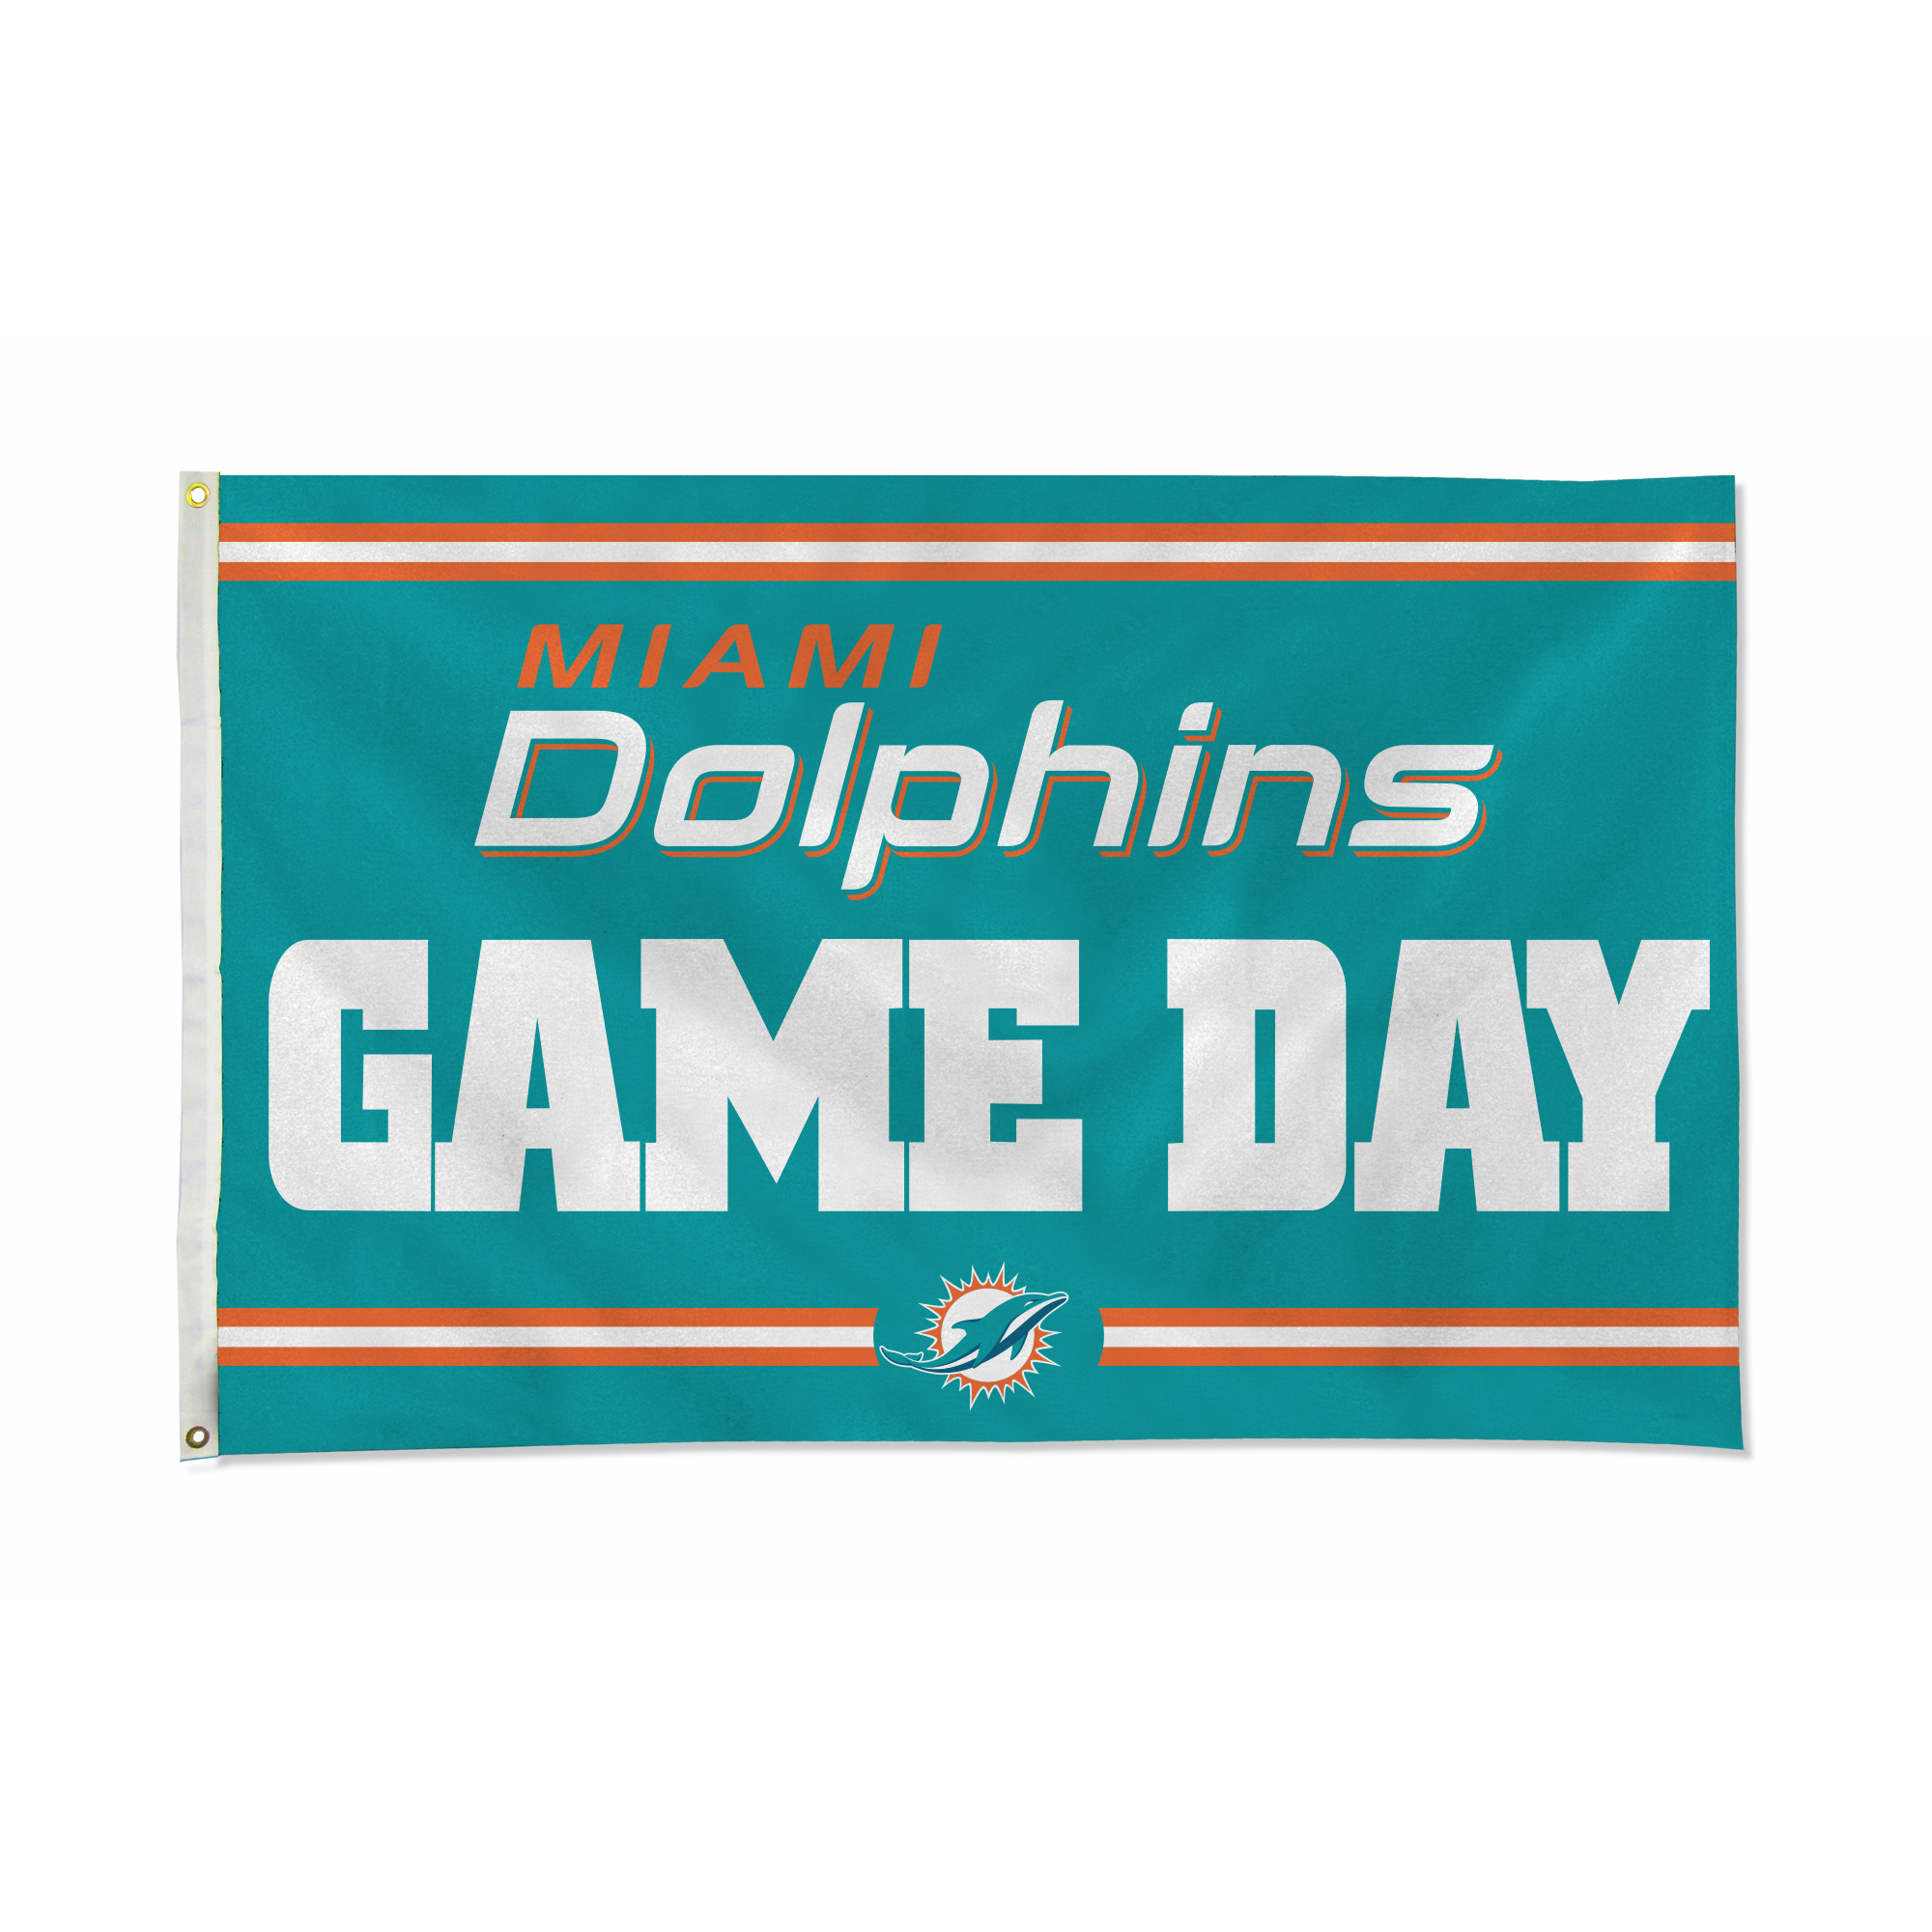 Rico Industries NFL Football Miami Dolphins Game Day 3' x 5' Banner Flag